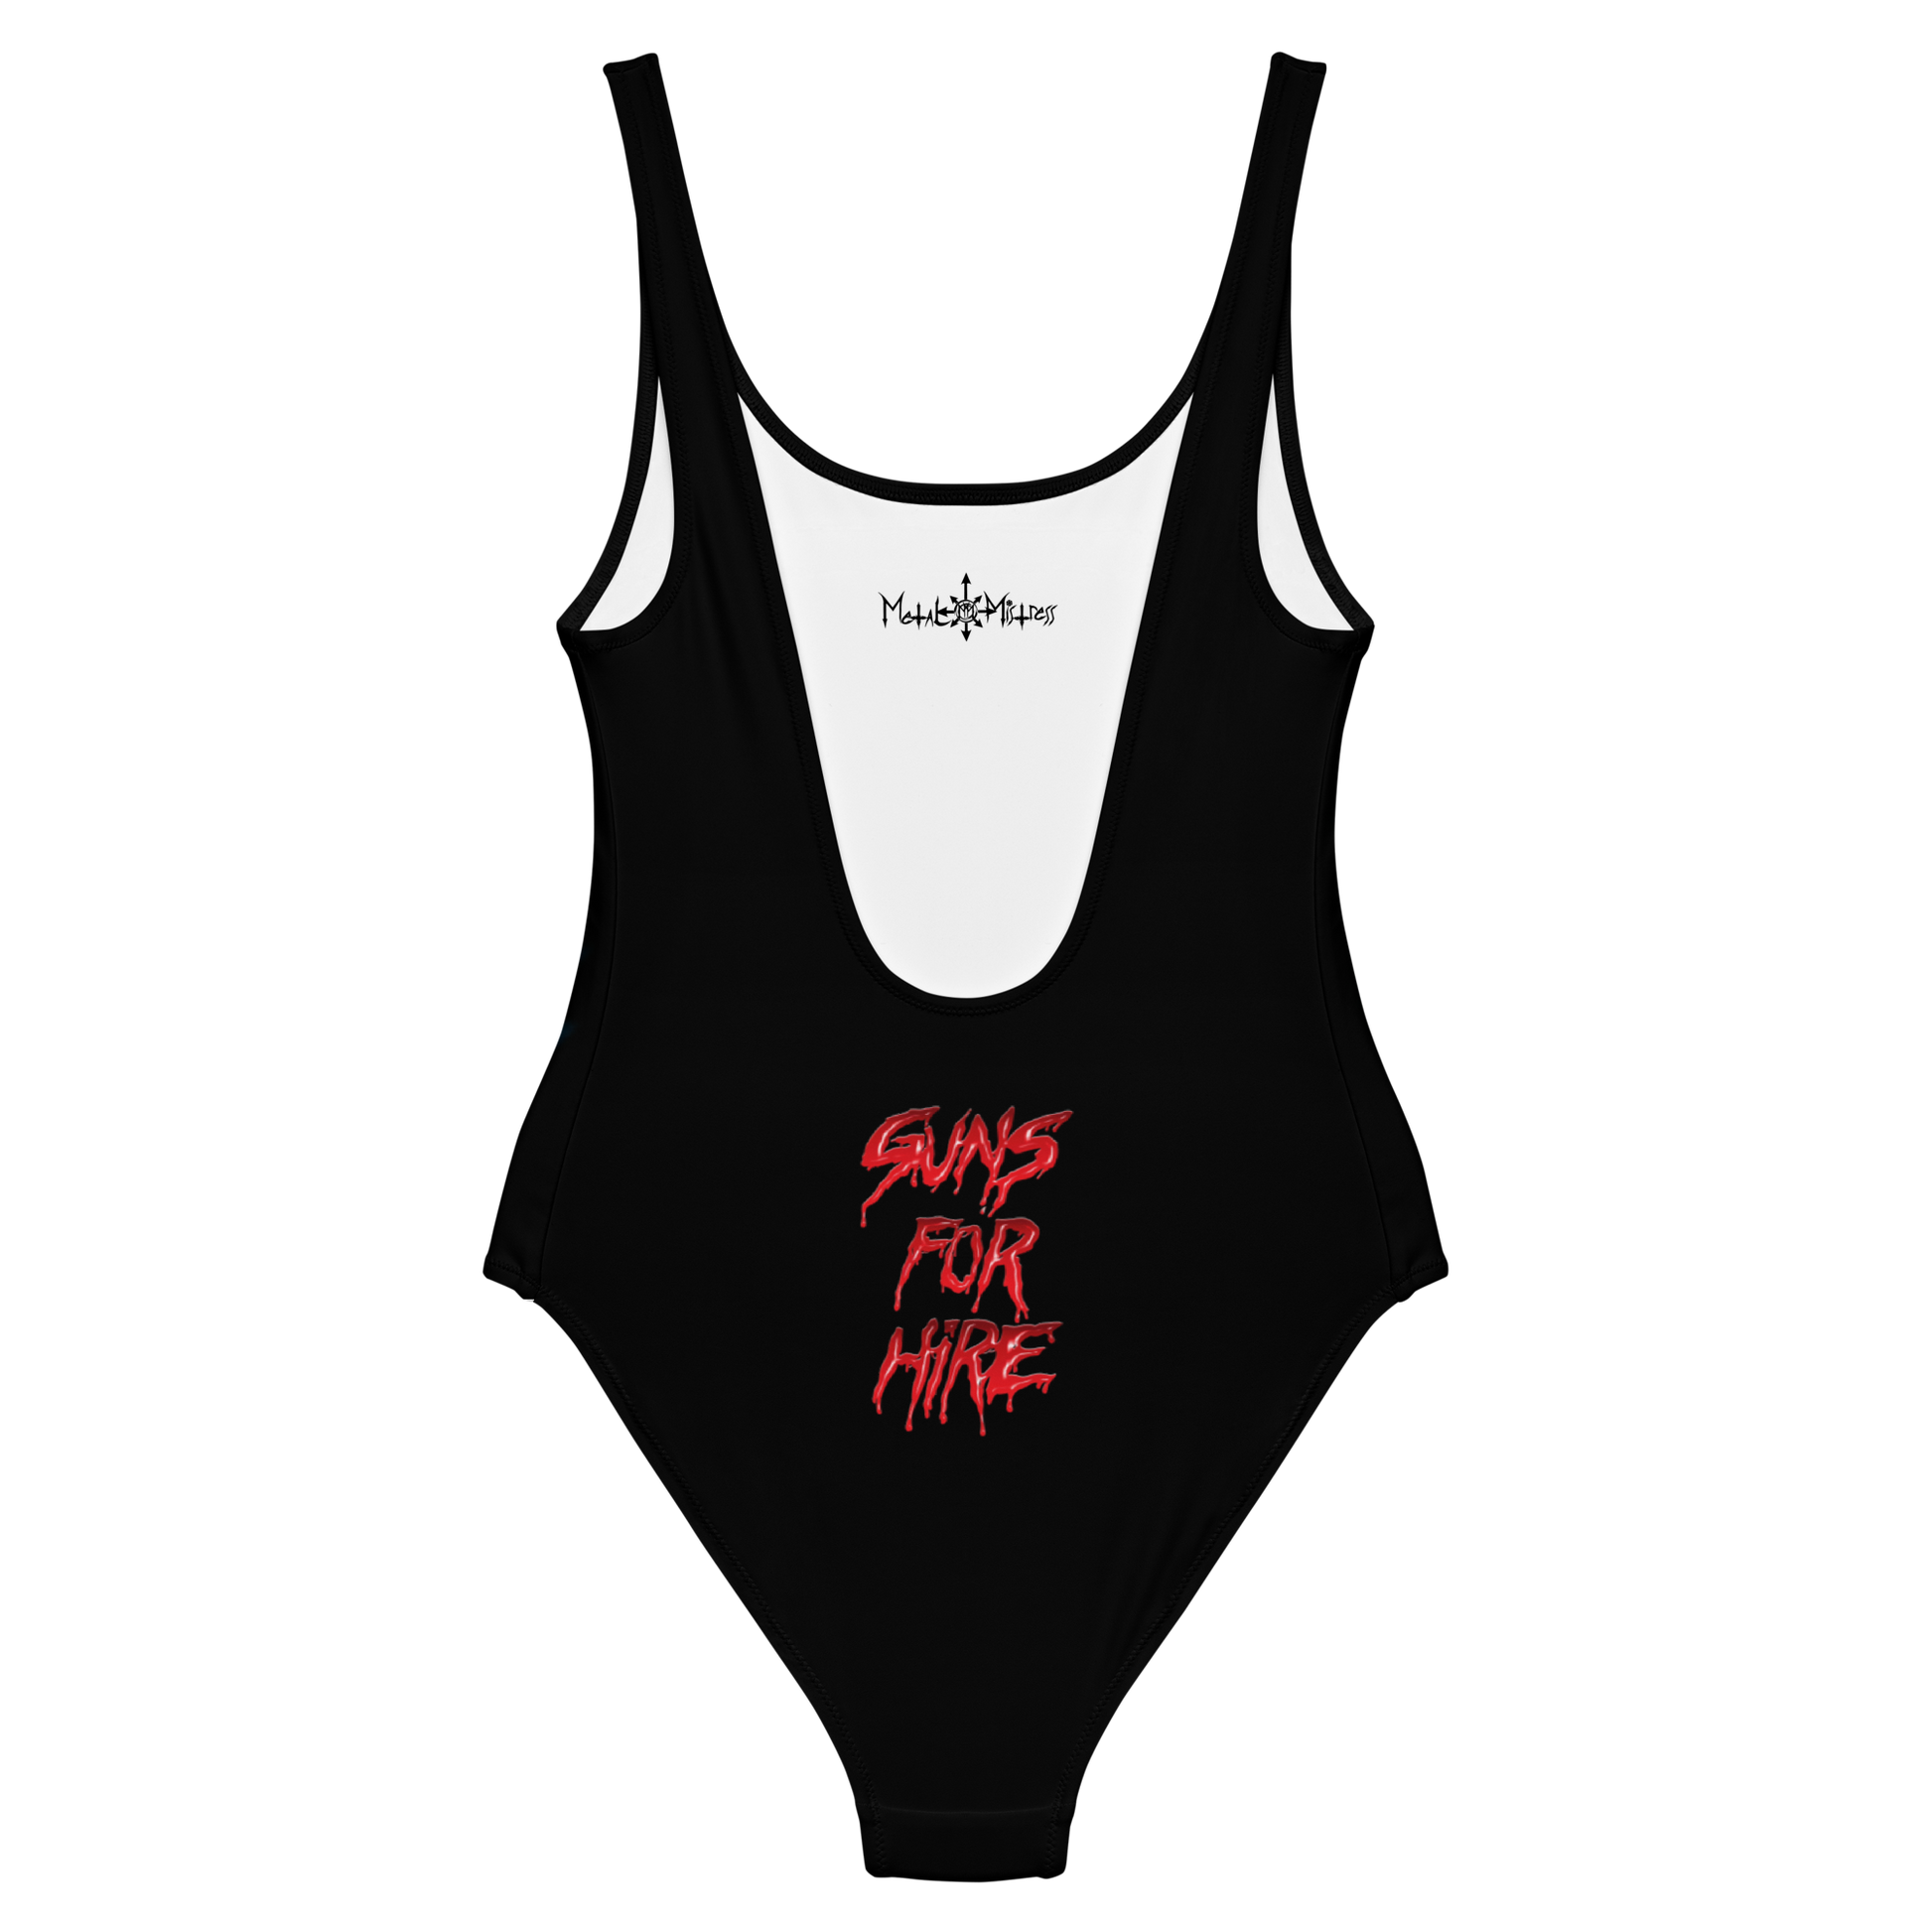 Tailgunner Guns for Hire official licensed one piece swimsuit by Metal Mistress